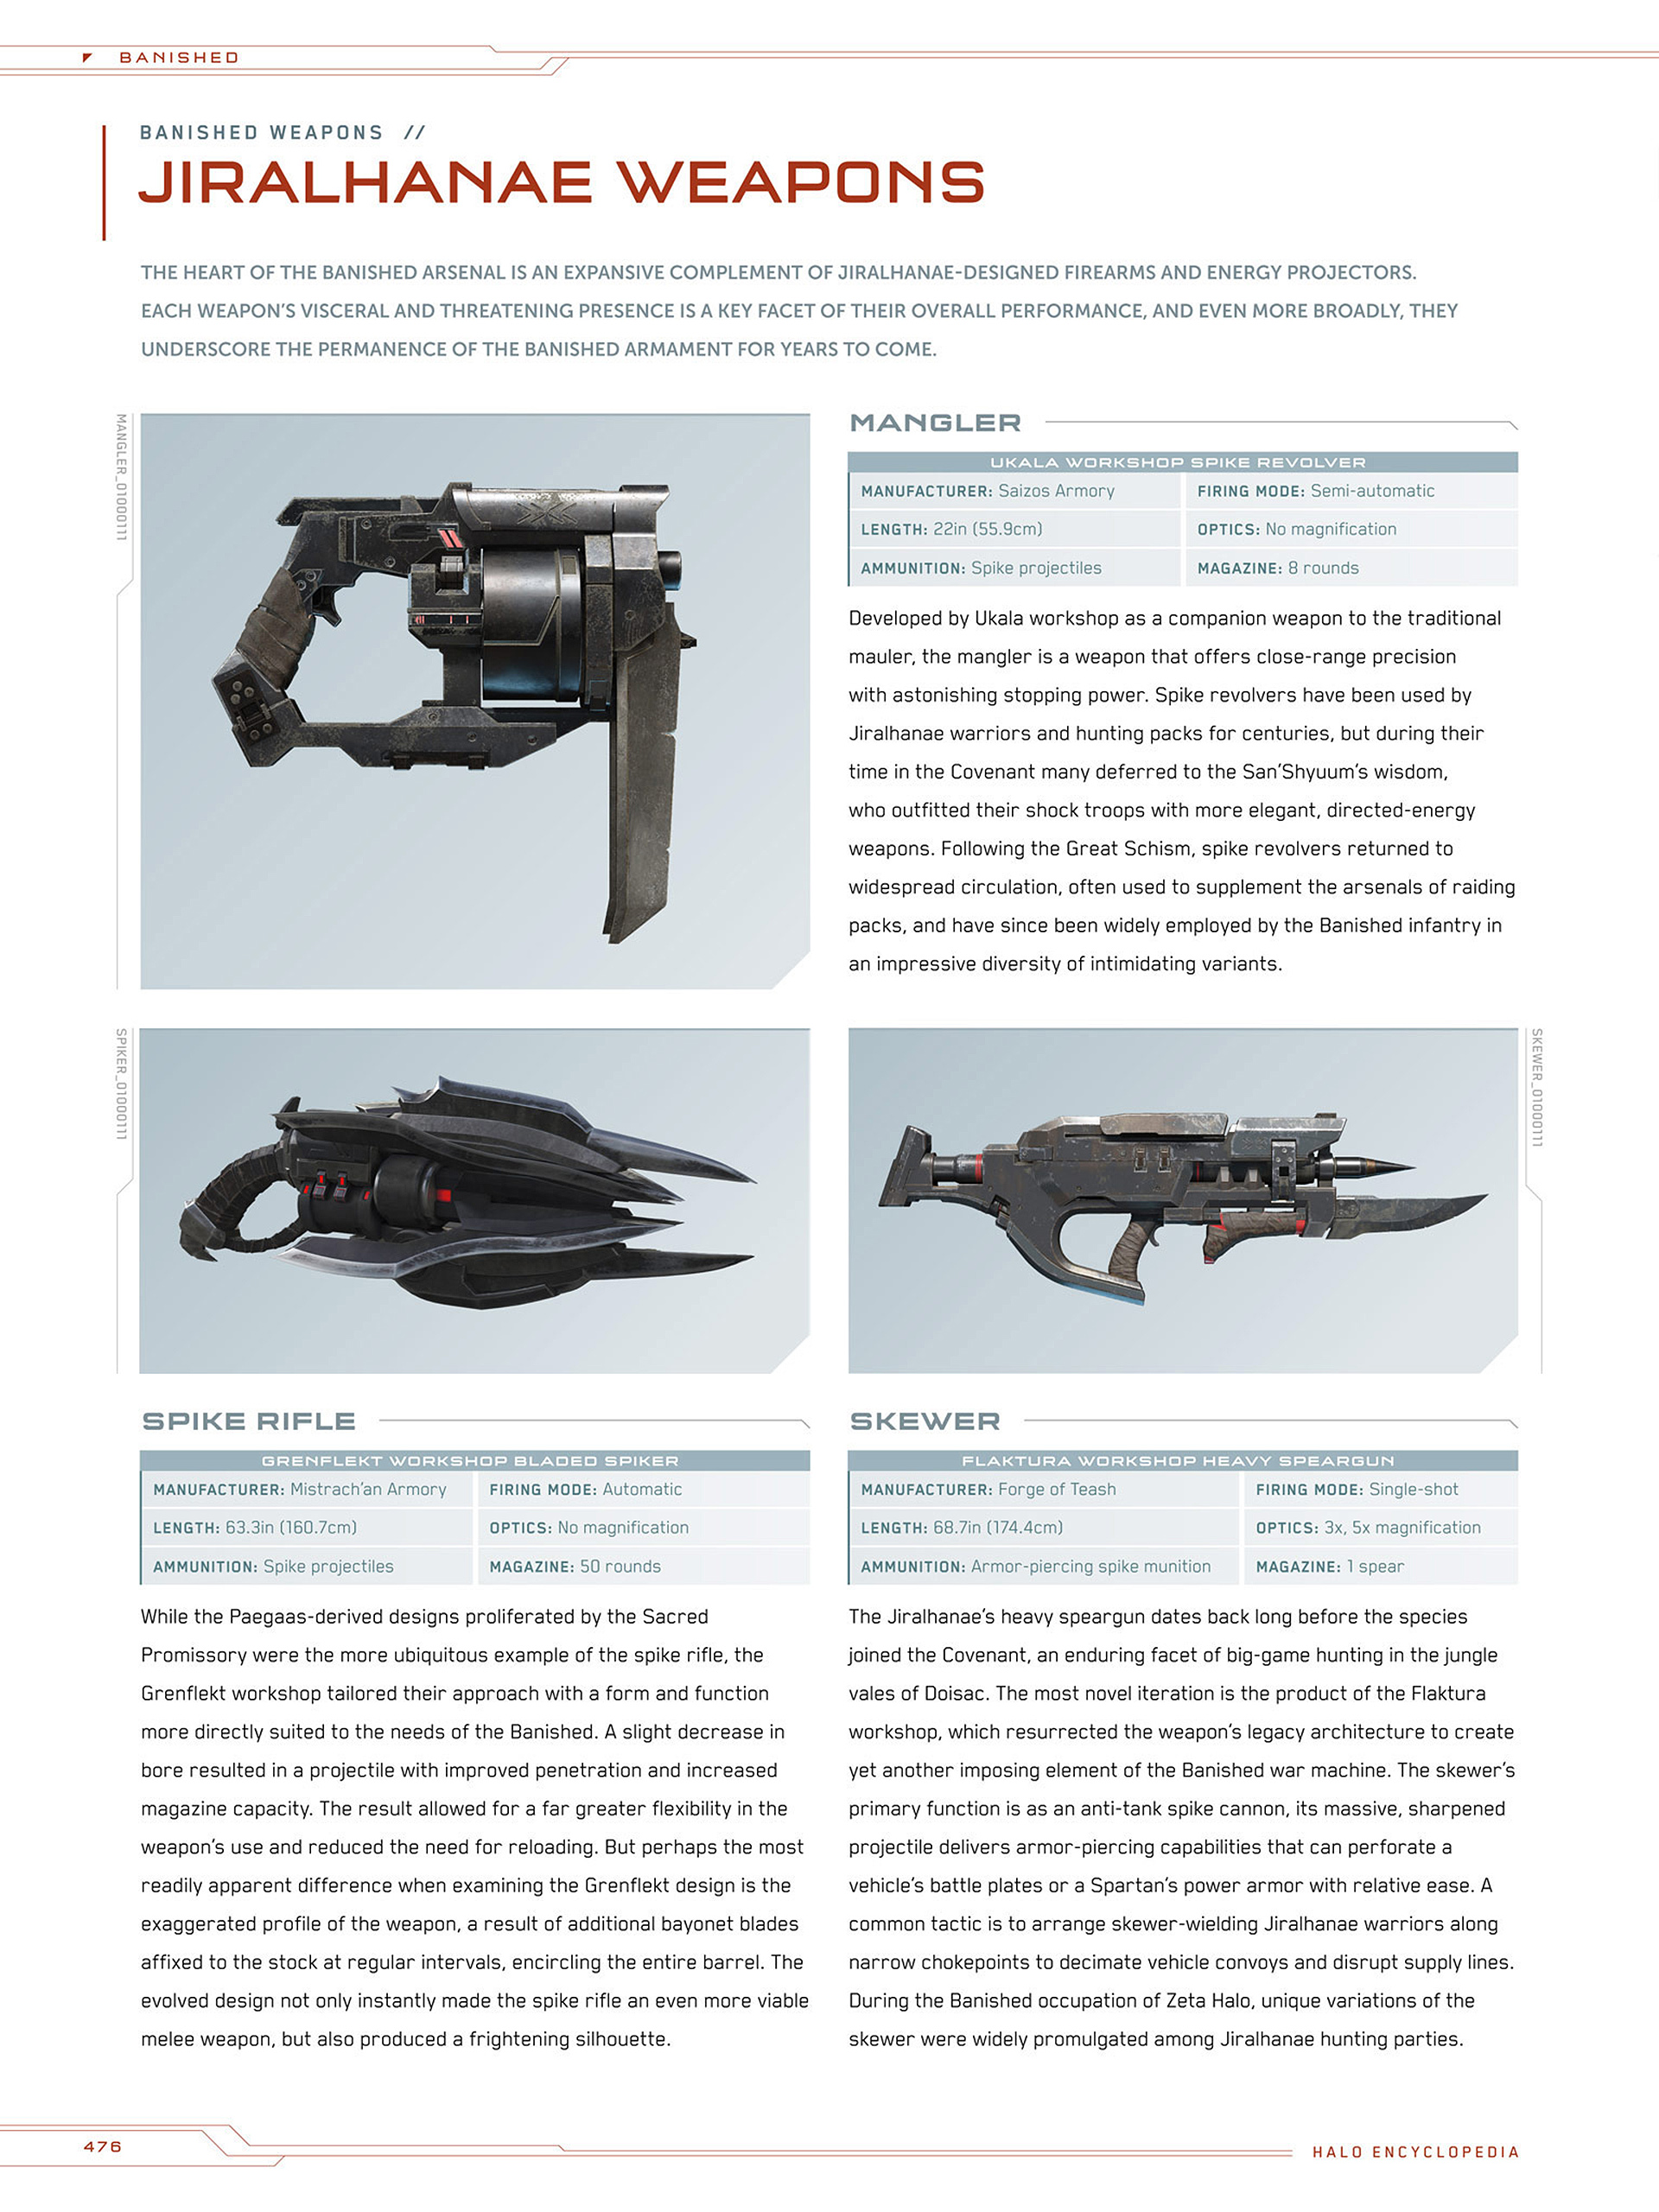 Read online Halo Encyclopedia comic -  Issue # TPB (Part 5) - 69